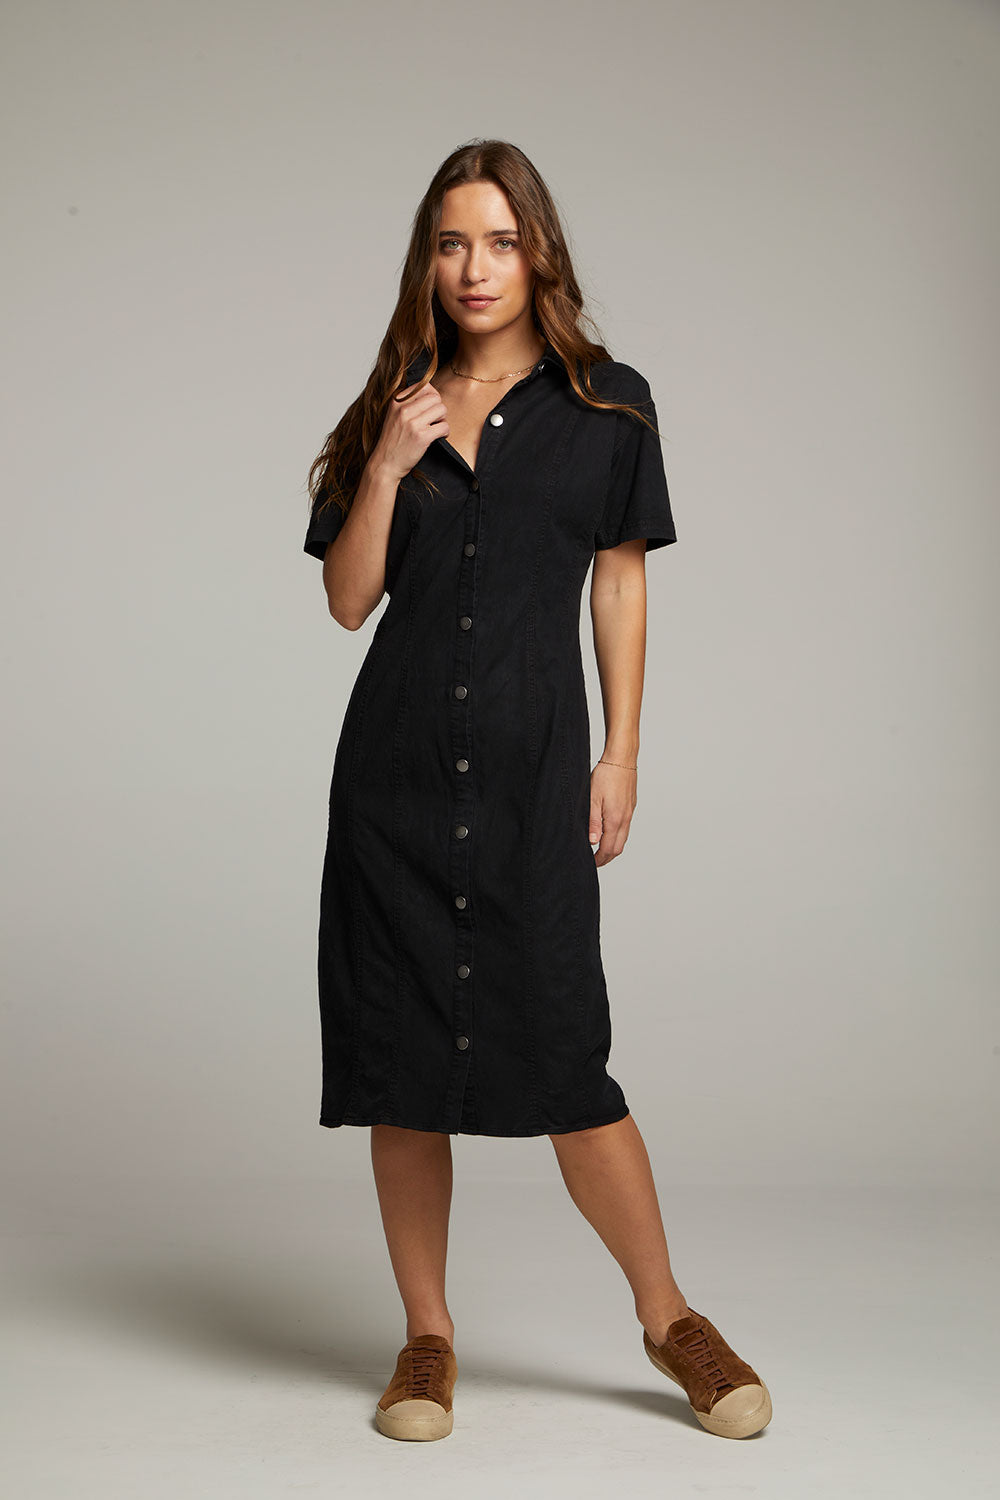 Rachelle Licorice Dress WOMENS chaserbrand